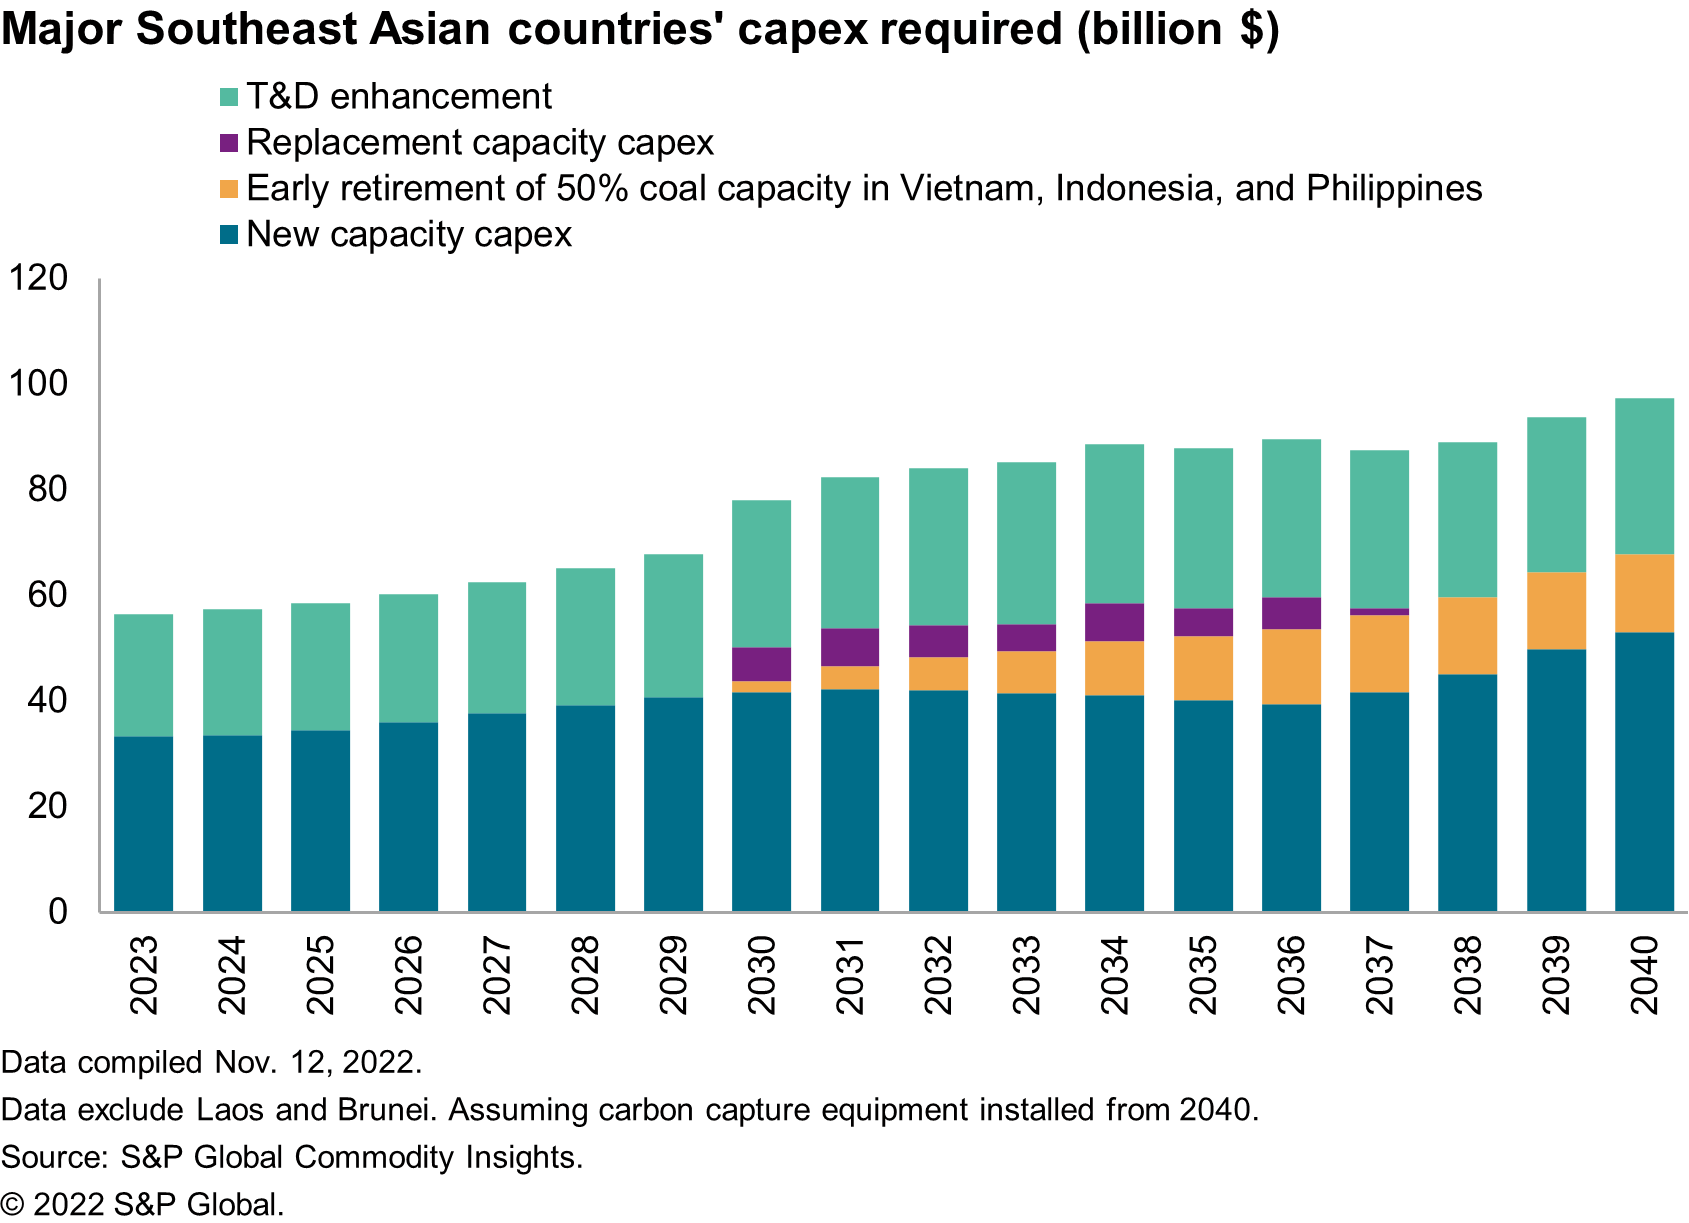 Major Southeast Asian countries' capex required (billion $)